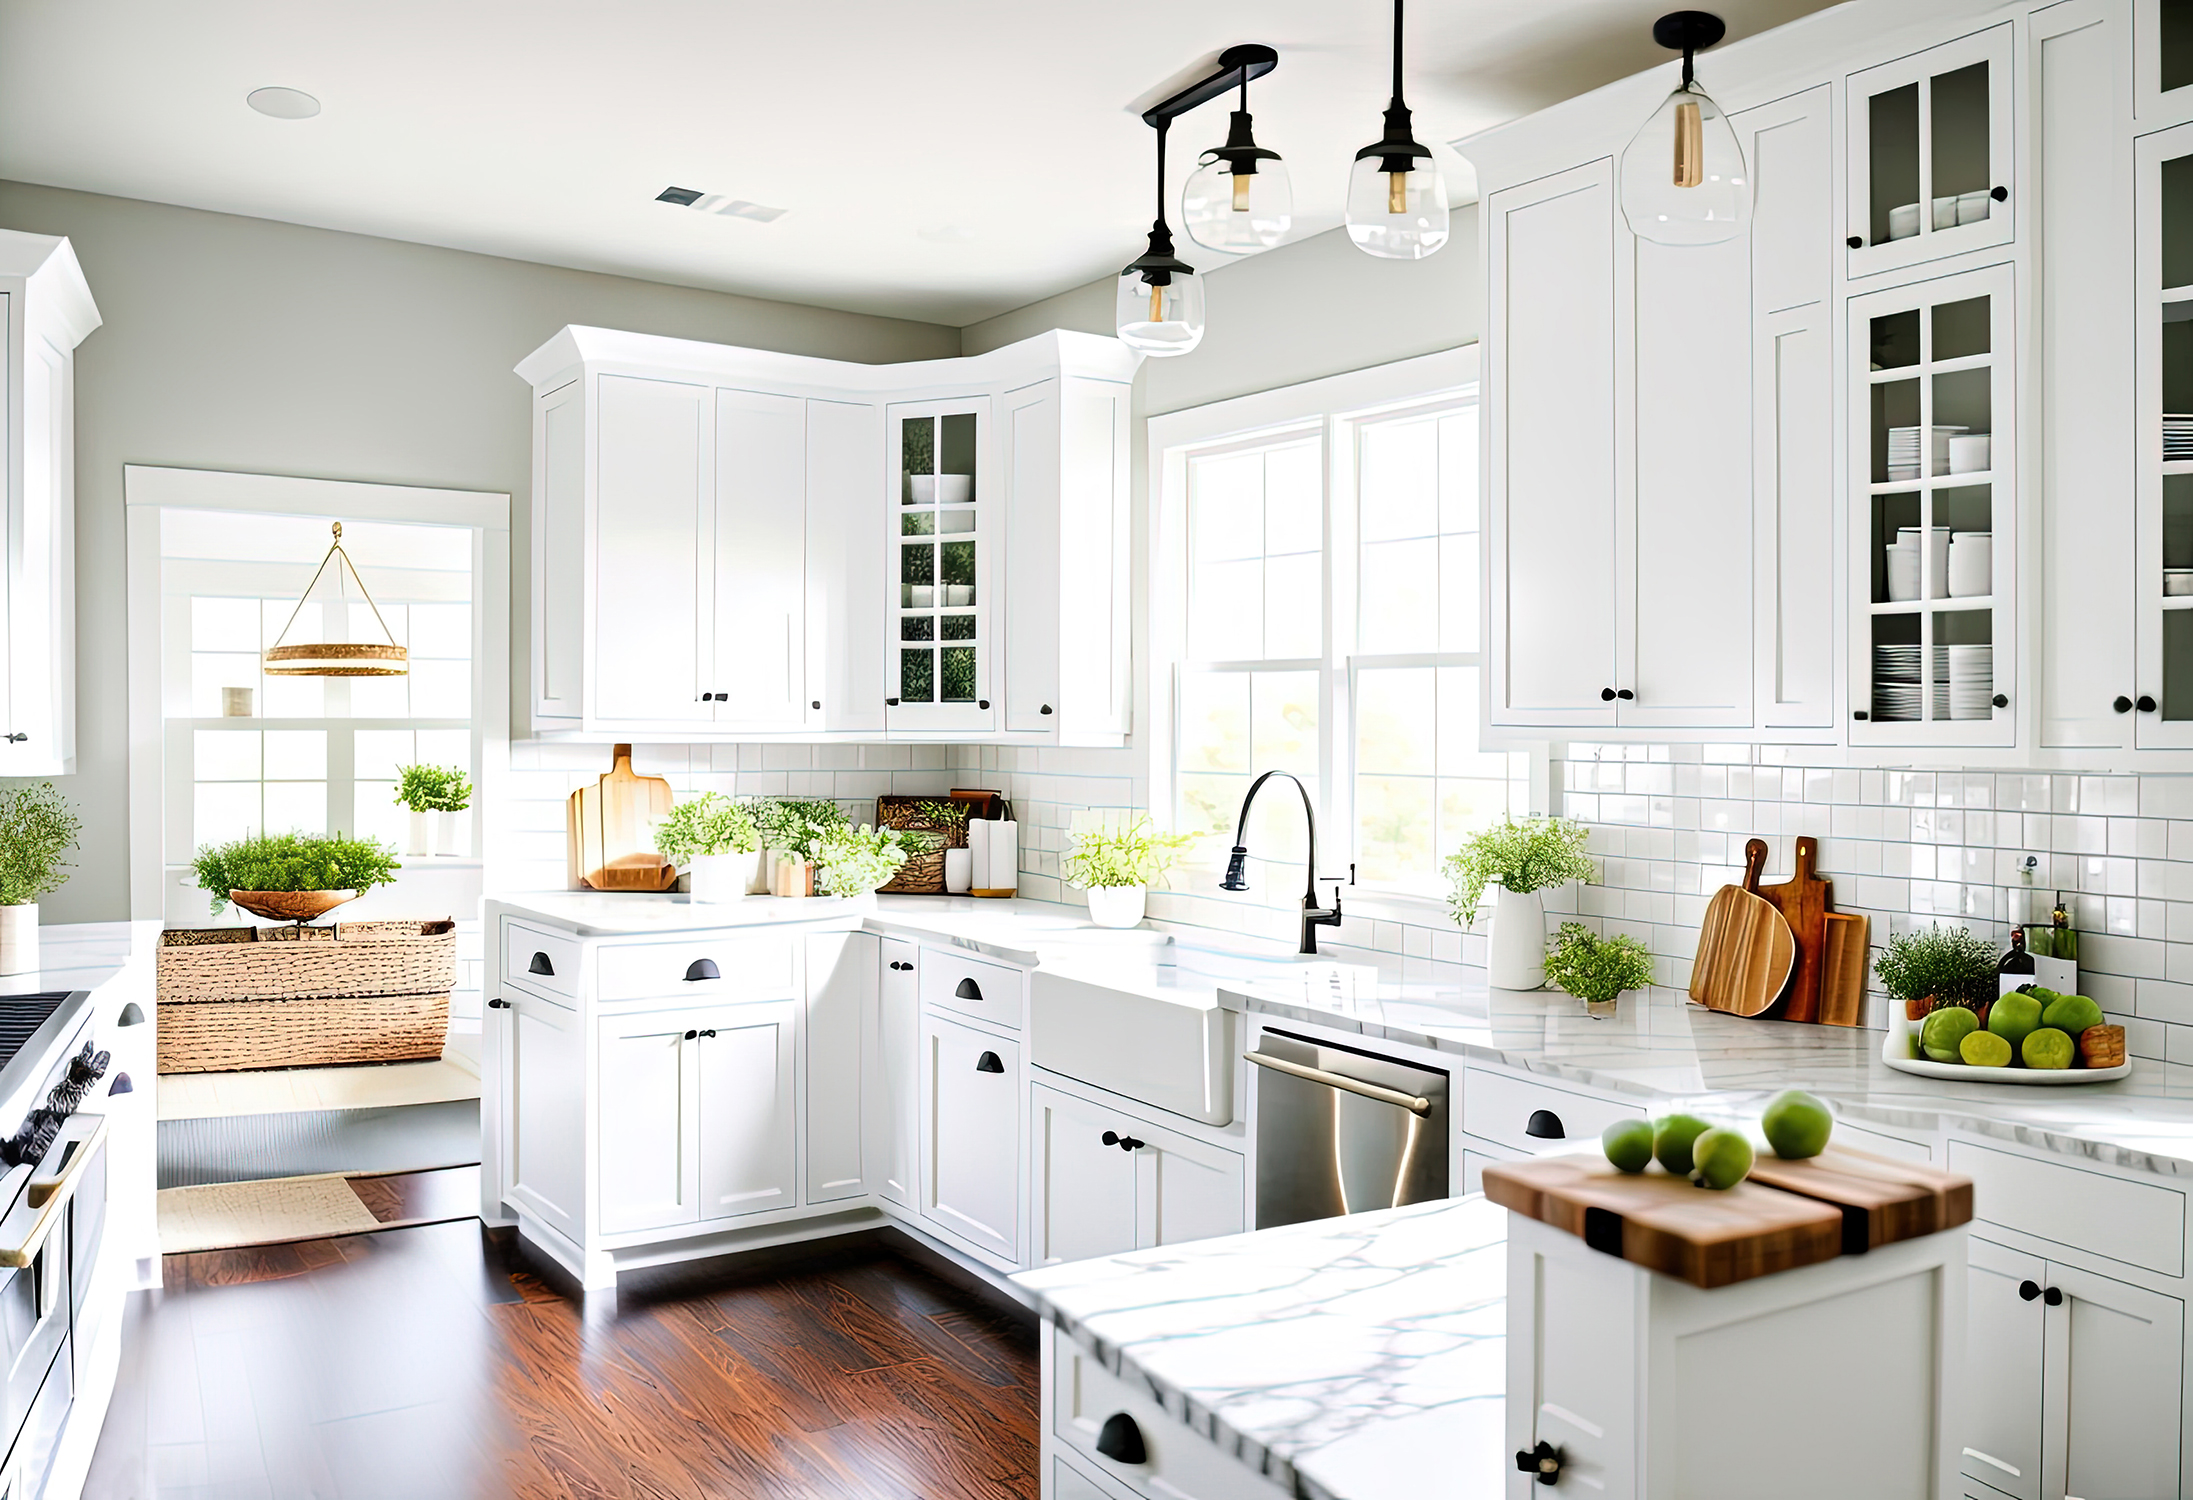 The Latest Kitchen Trends in Color, Design, and Appliances